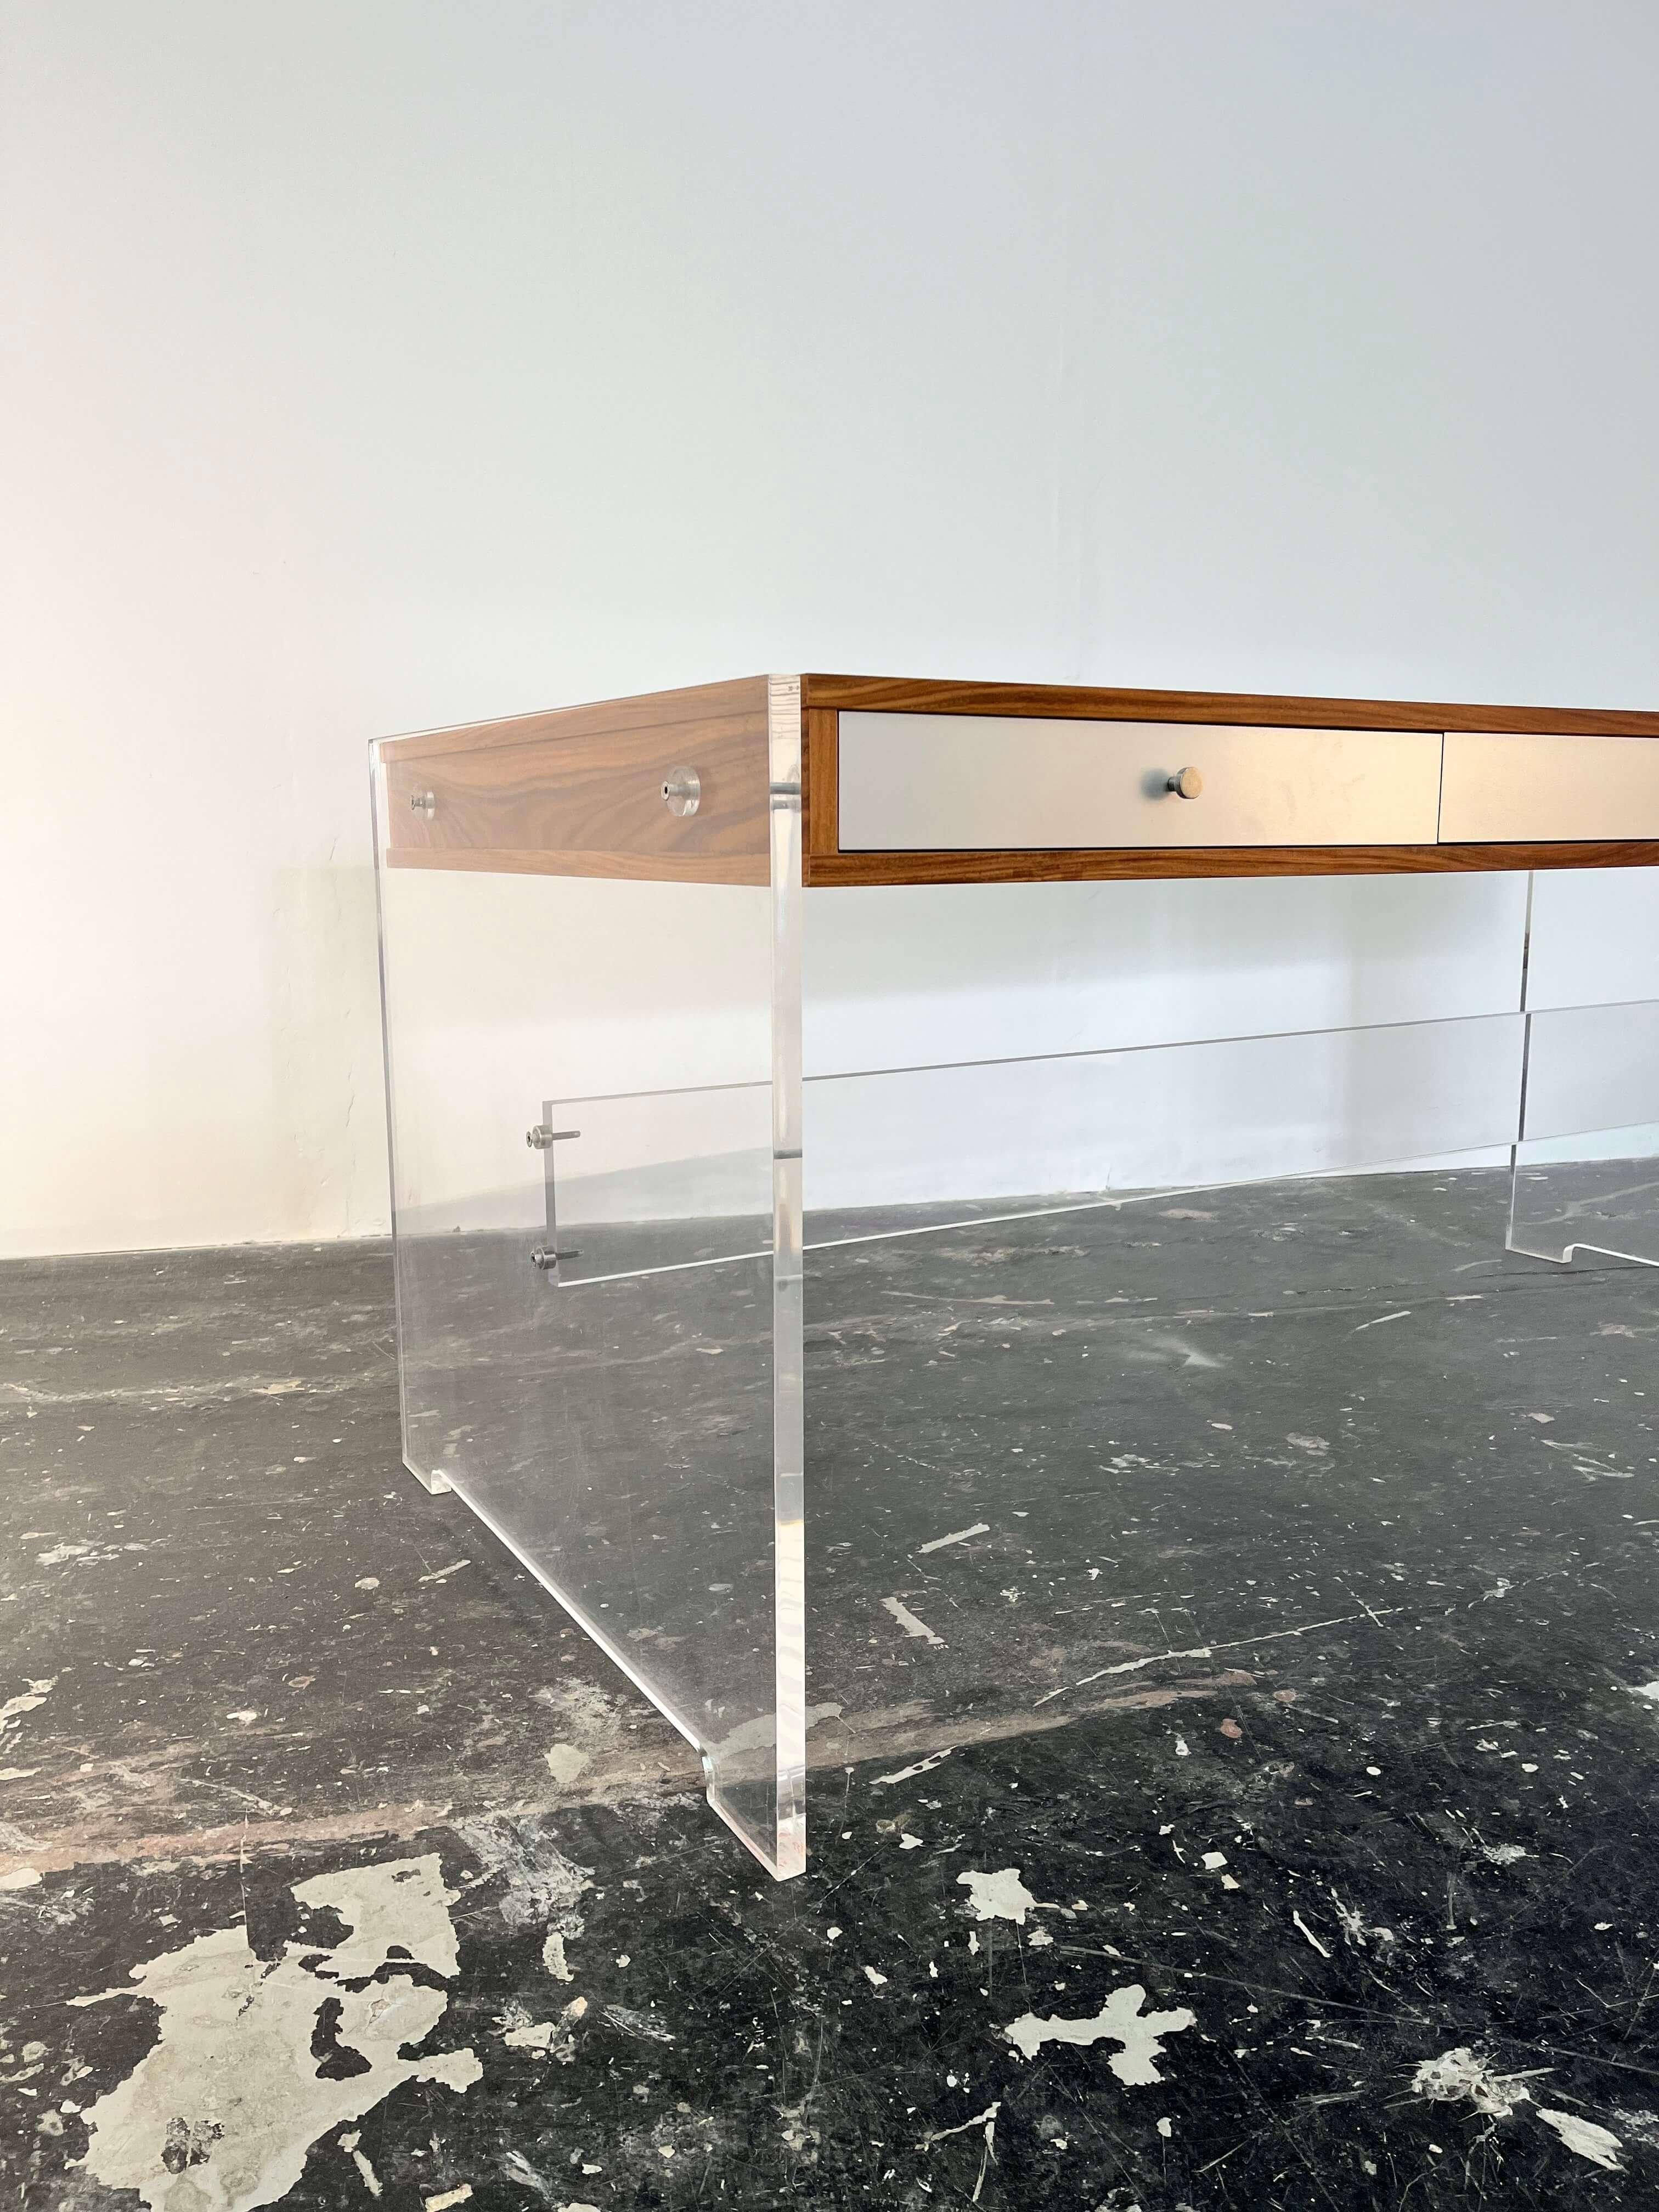 Poul Nørreklit desk model GP 160 by Georg Petersens Møbelfabrik, Denmark

This is a rare and collectible lucite and rosewood desk. Lucite slab sides with beautifully grained Rosewood case, lucite spacers, aluminum drawer fronts, and nickeled brass